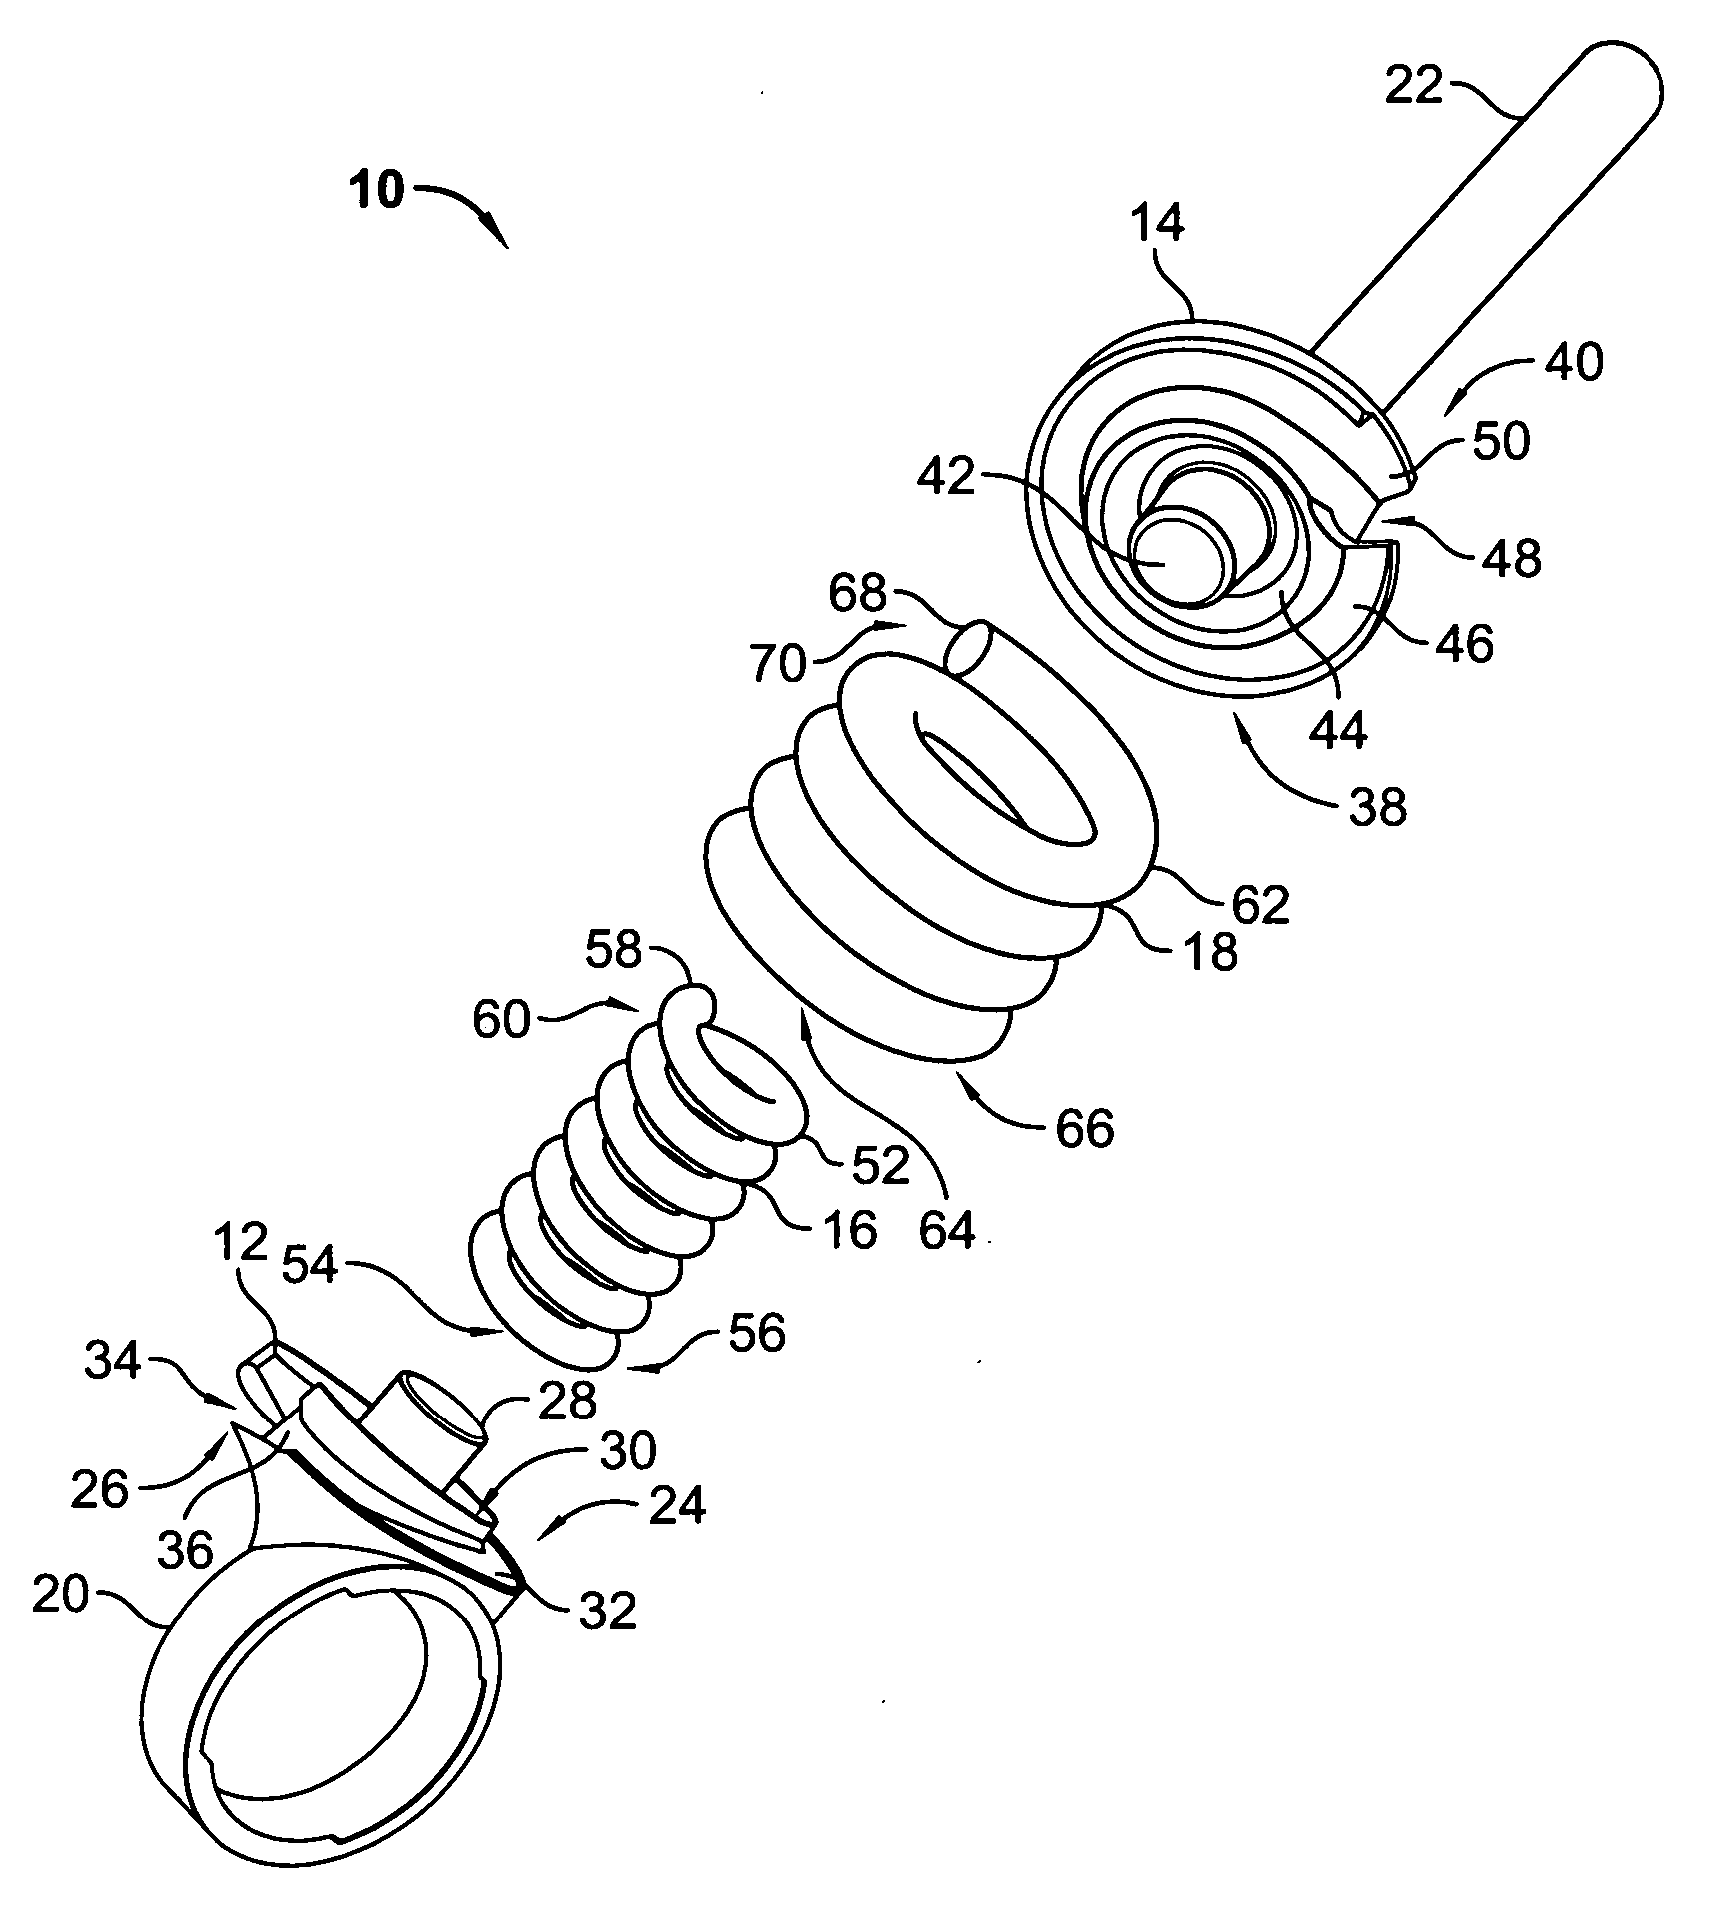 Spring junction and assembly methods for spinal device